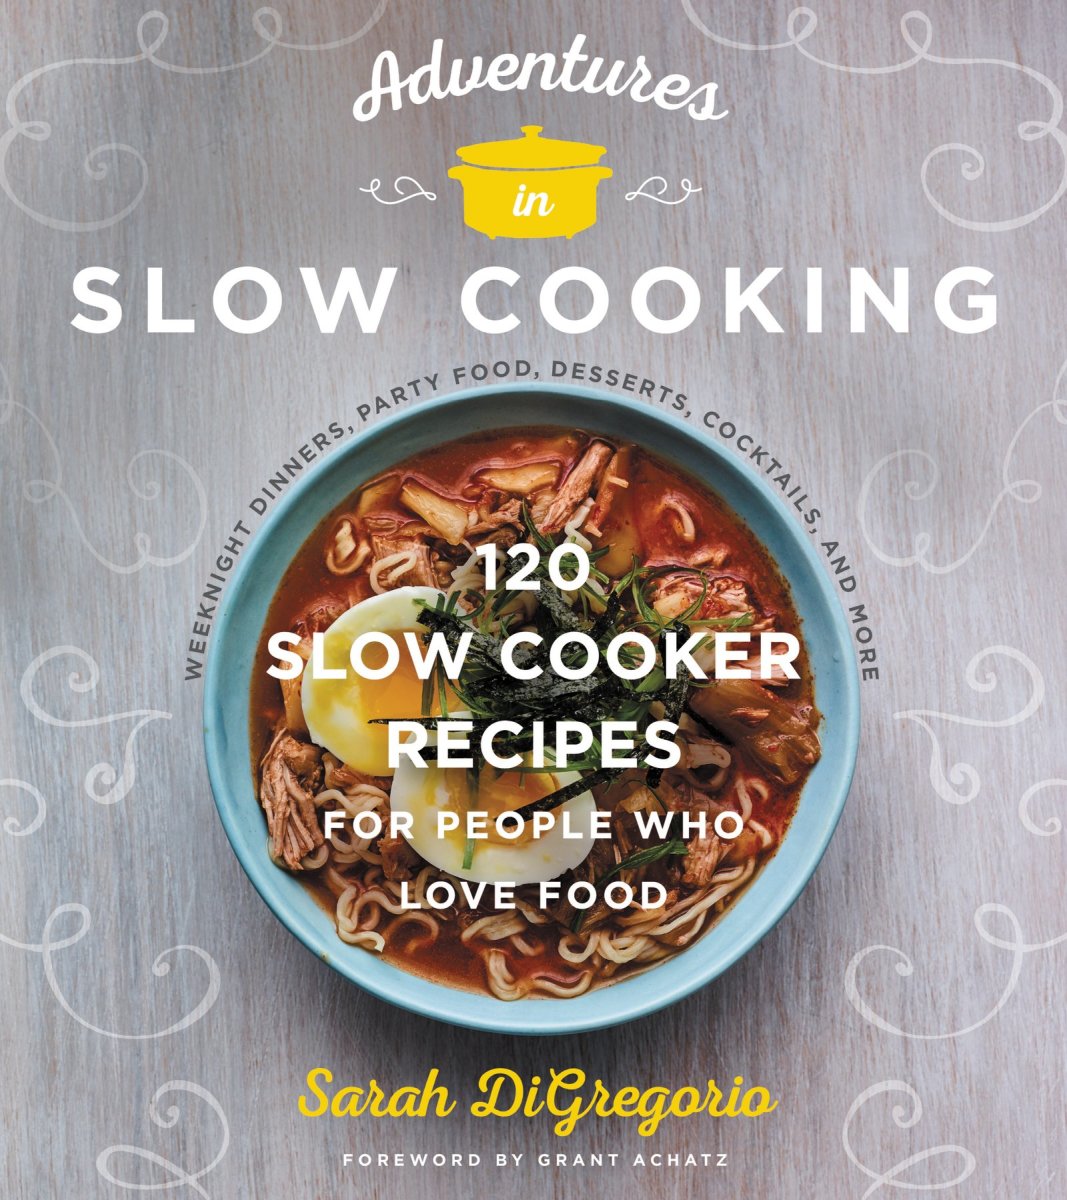 slow cooking